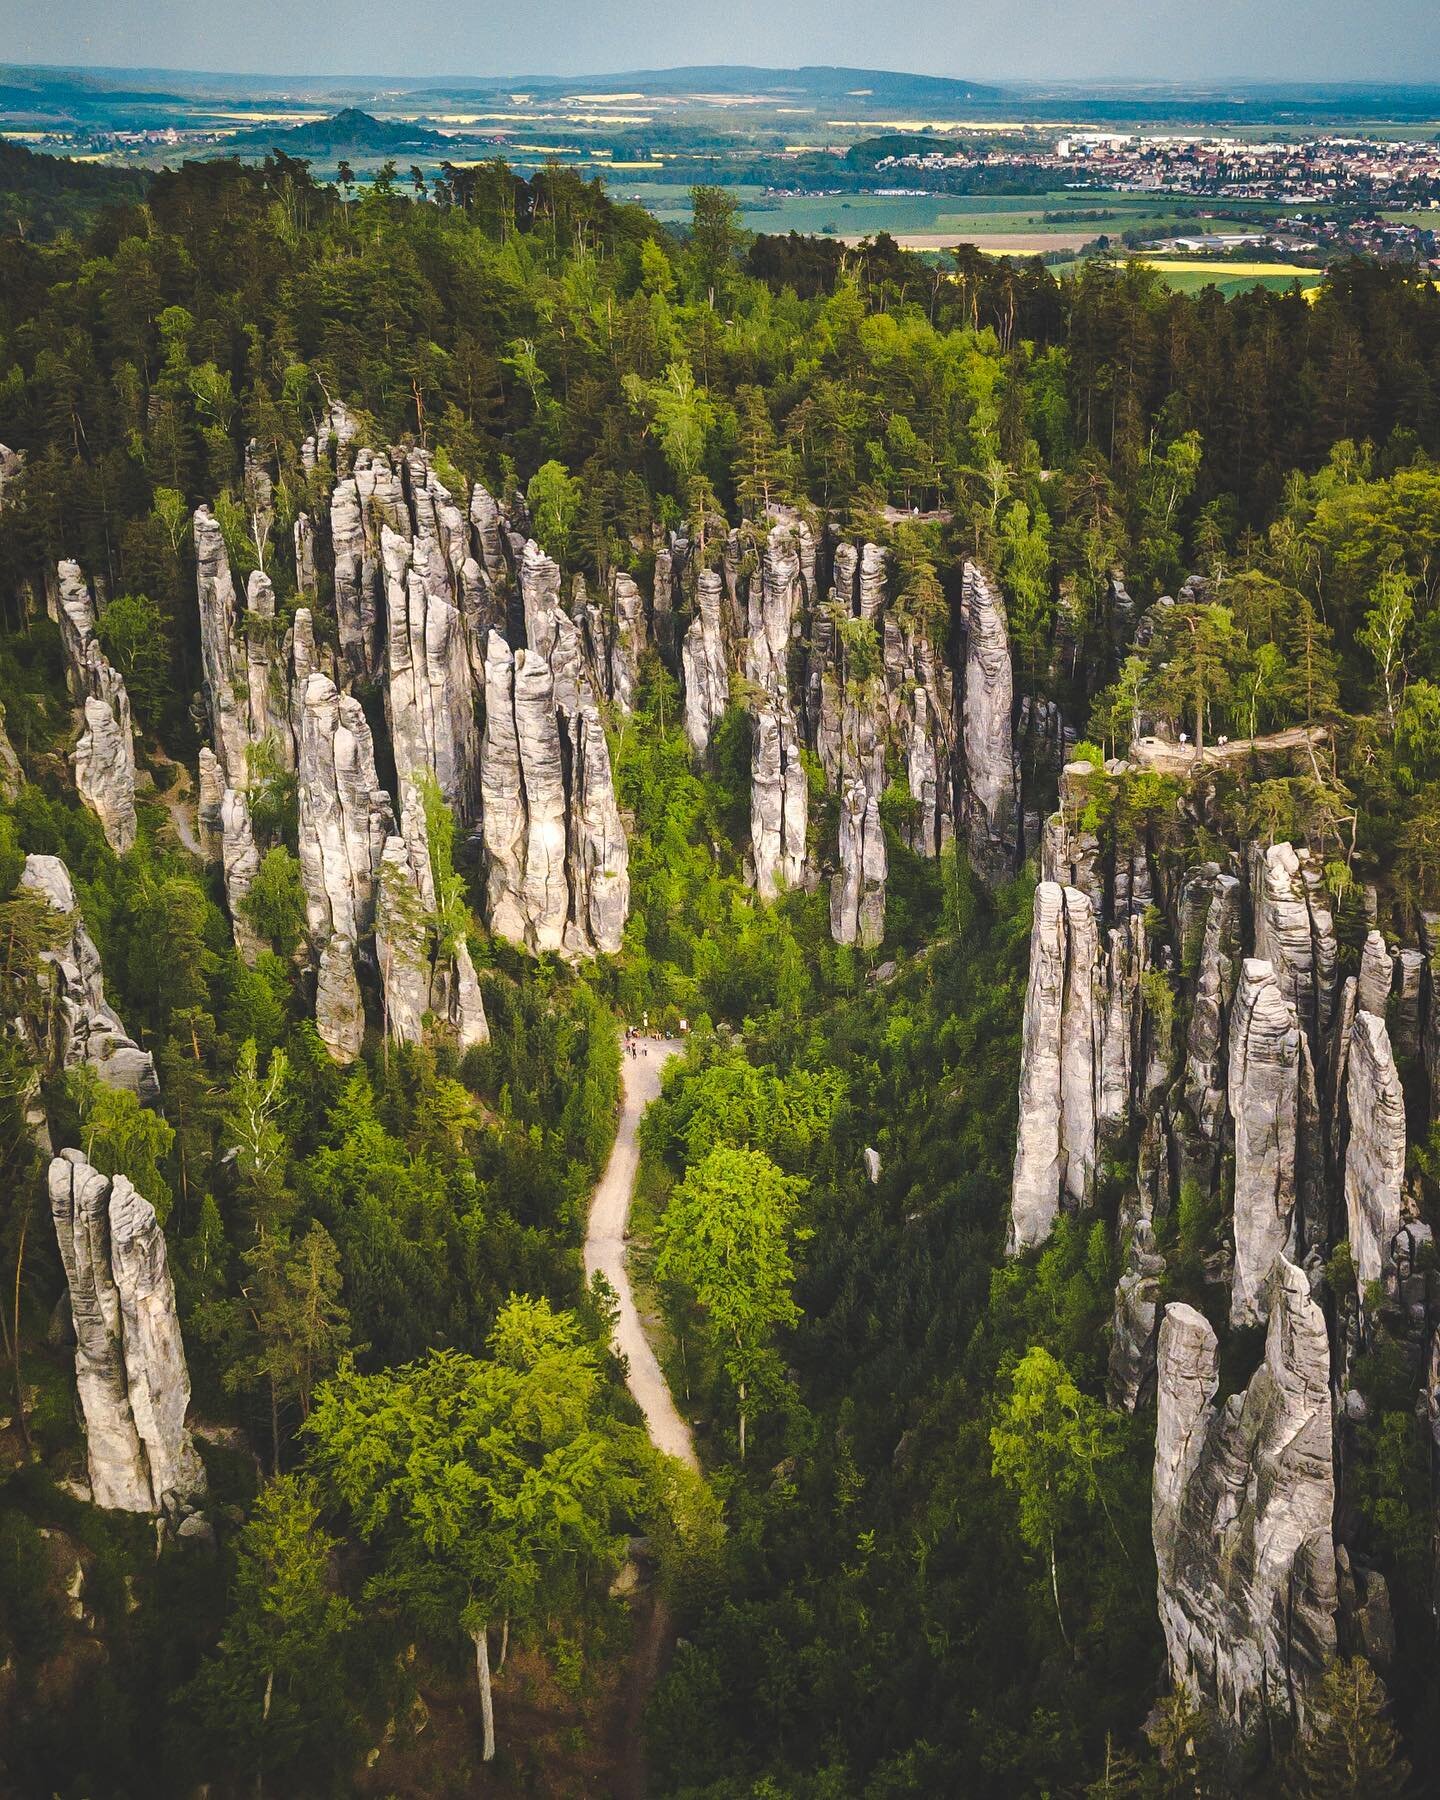 Quite spectacular these sandstone rock formation in #BohemianParadise called #PrachovskeSkaly ⛰🇨🇿🌳 they are magical and a bit eroded since its formation 60mil years ago. #travellocal #travel #thisisczech #travelczech #instaczech #czechrepublic #sa